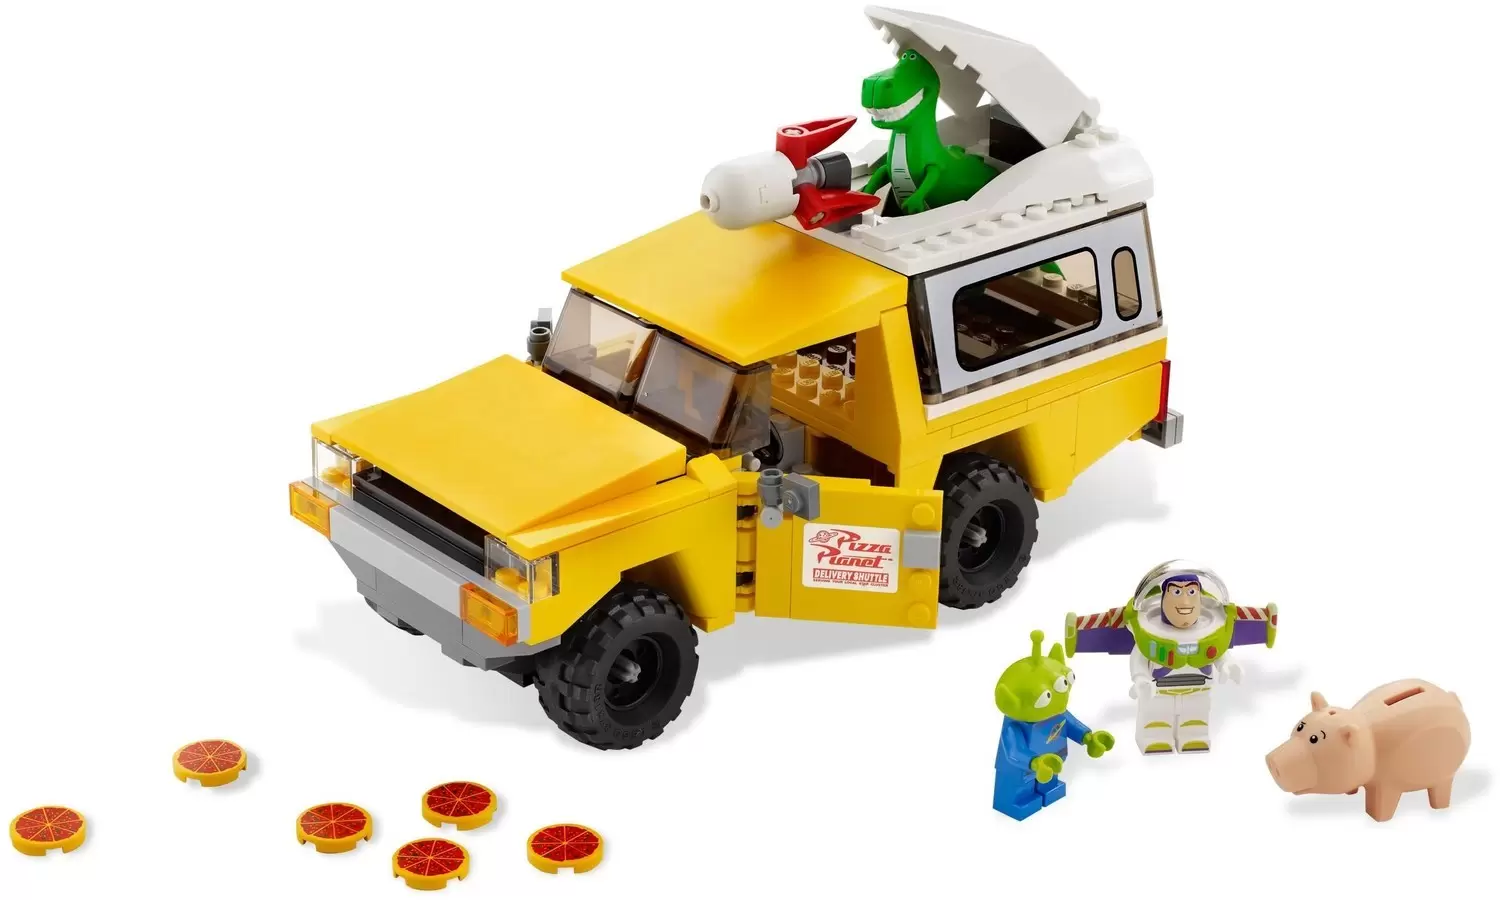 LEGO Toy Story - Pizza Planet Truck Rescue